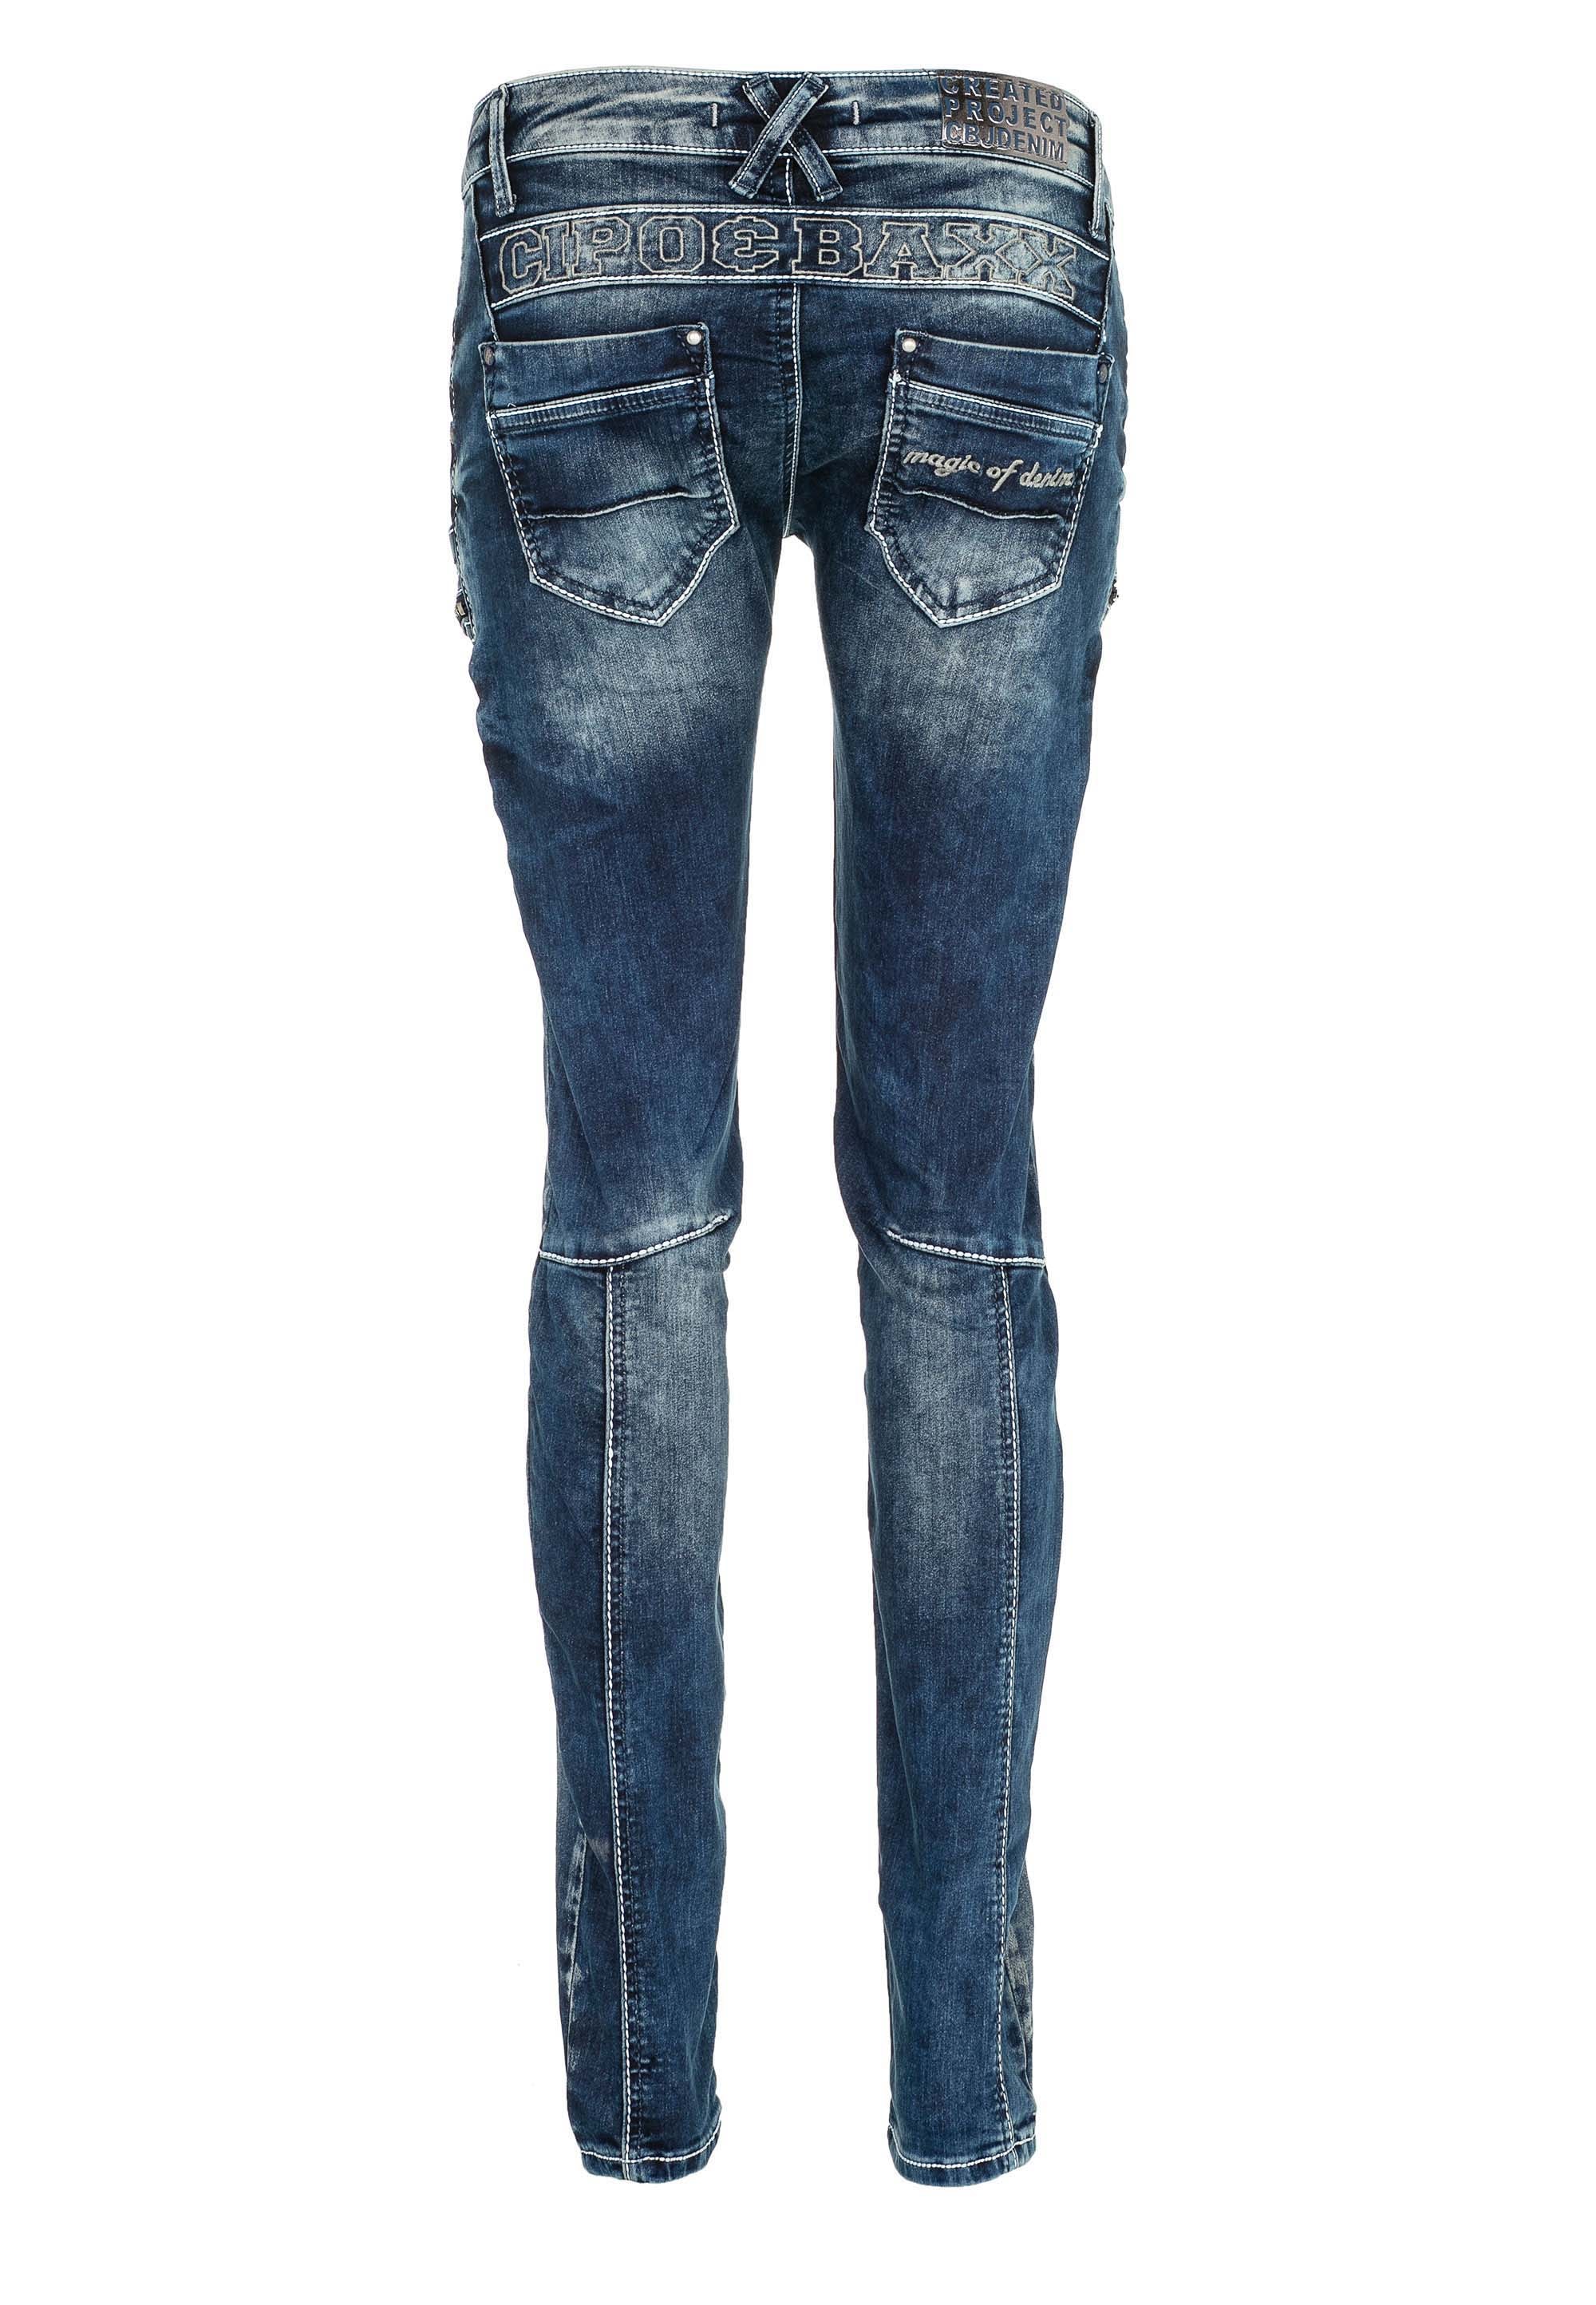 Cipo & Baxx Bequeme Jeans, mit niedriger Taille in Skinny Fİt